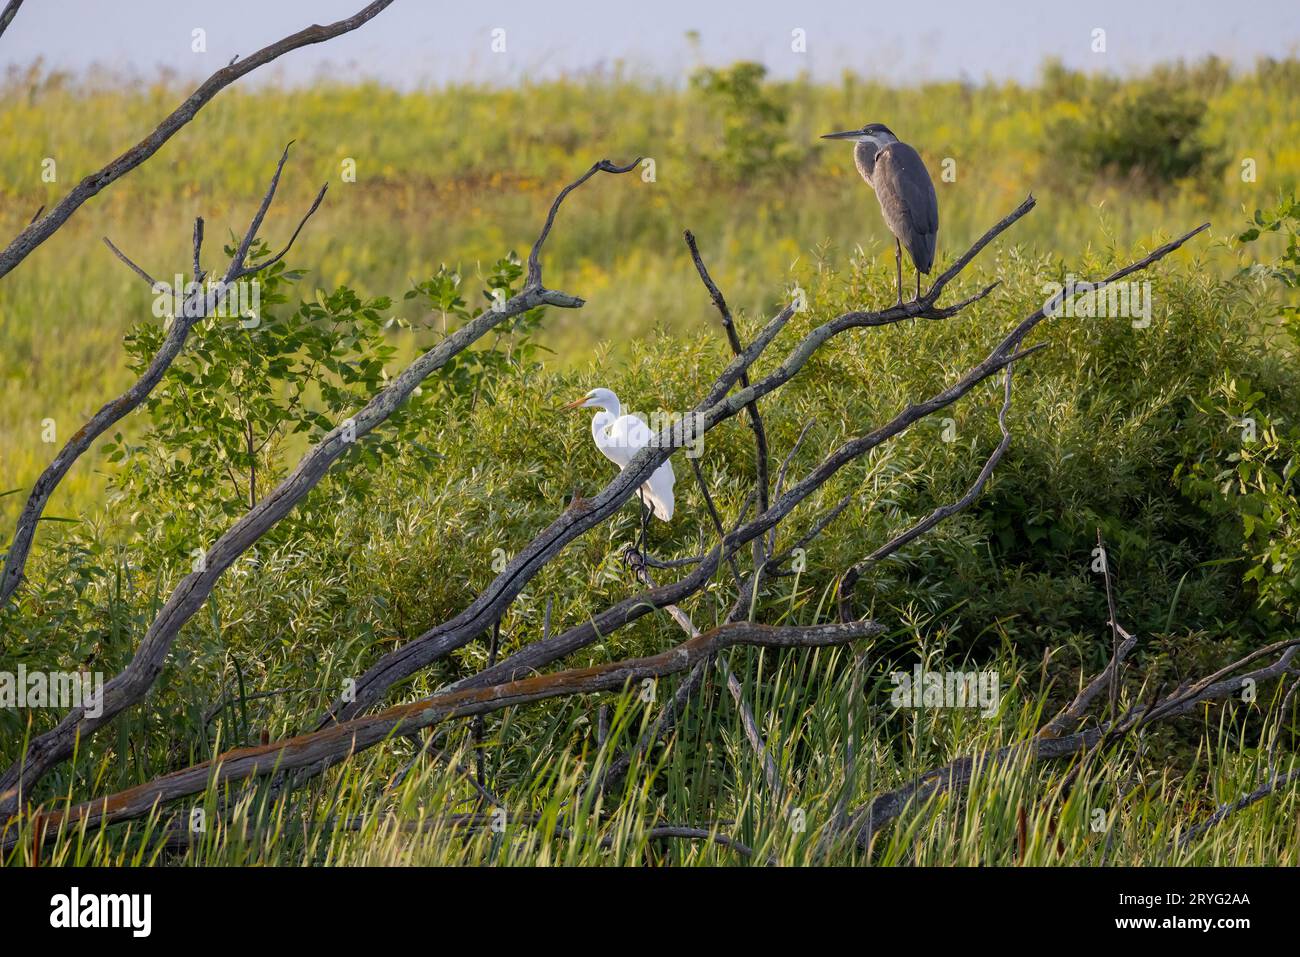 Snowy egret and Great blue heron Stock Photo